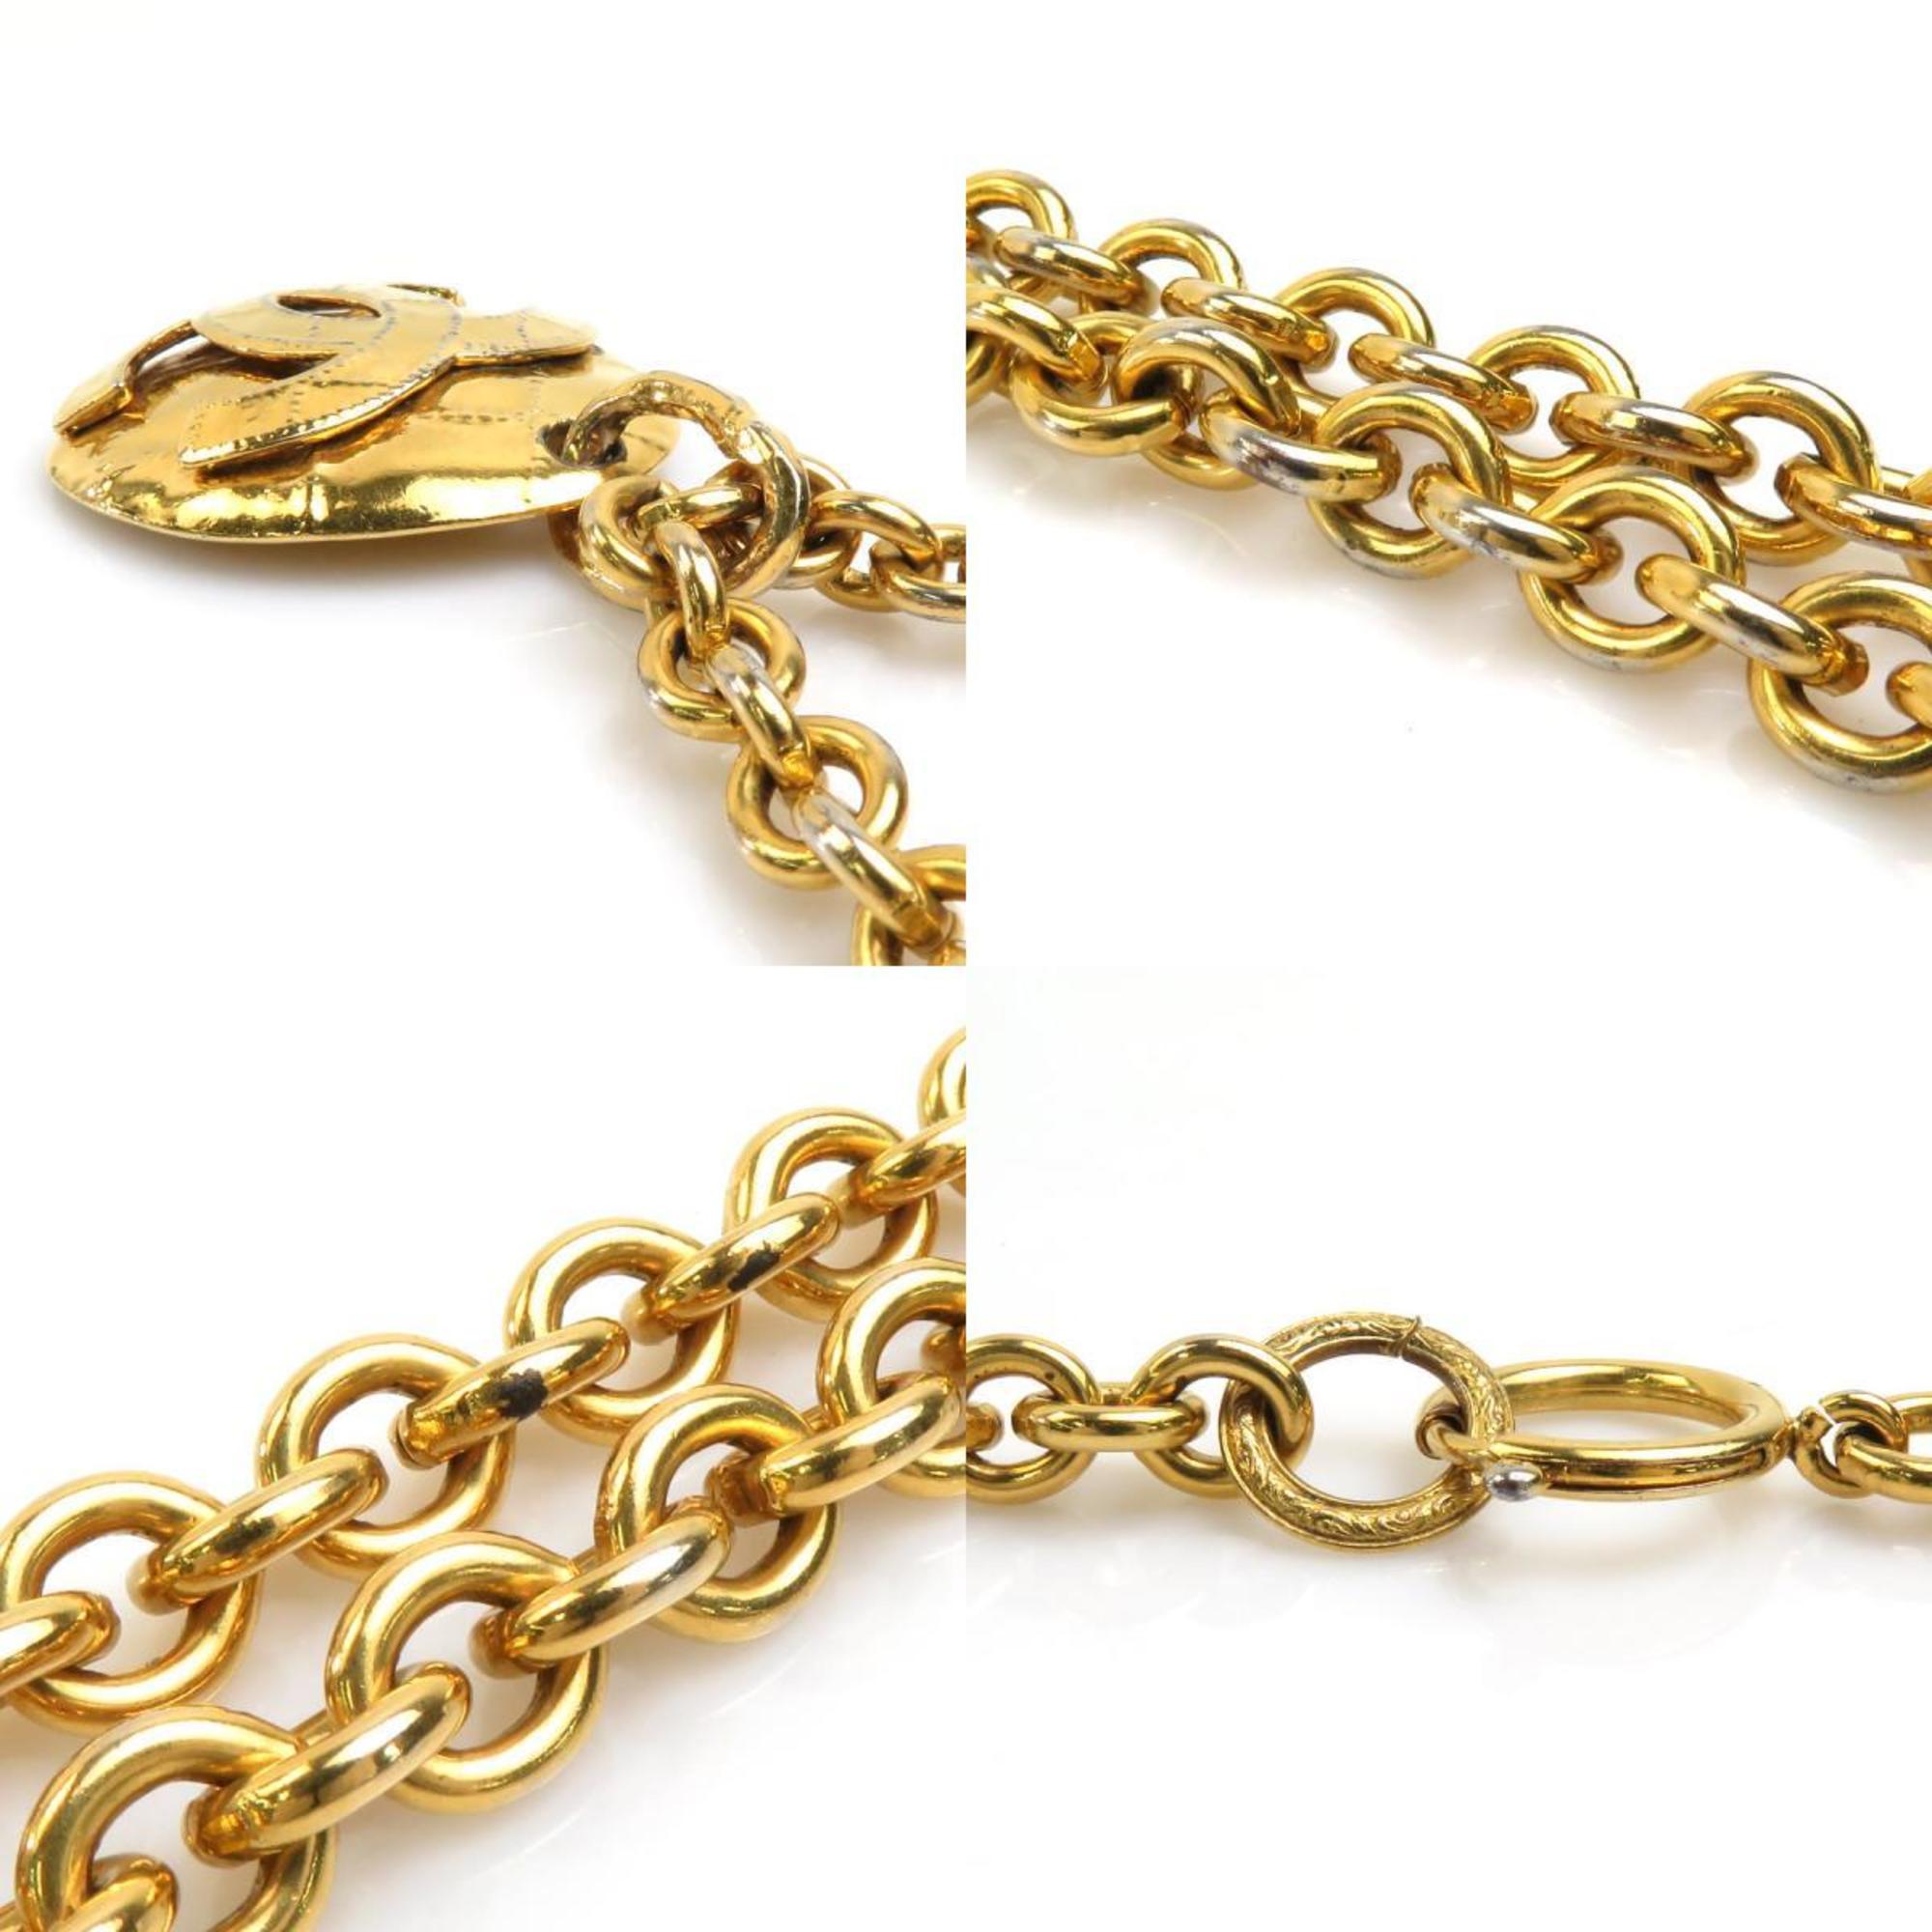 CHANEL Coco Mark Metal Gold Necklace for Women e58477g